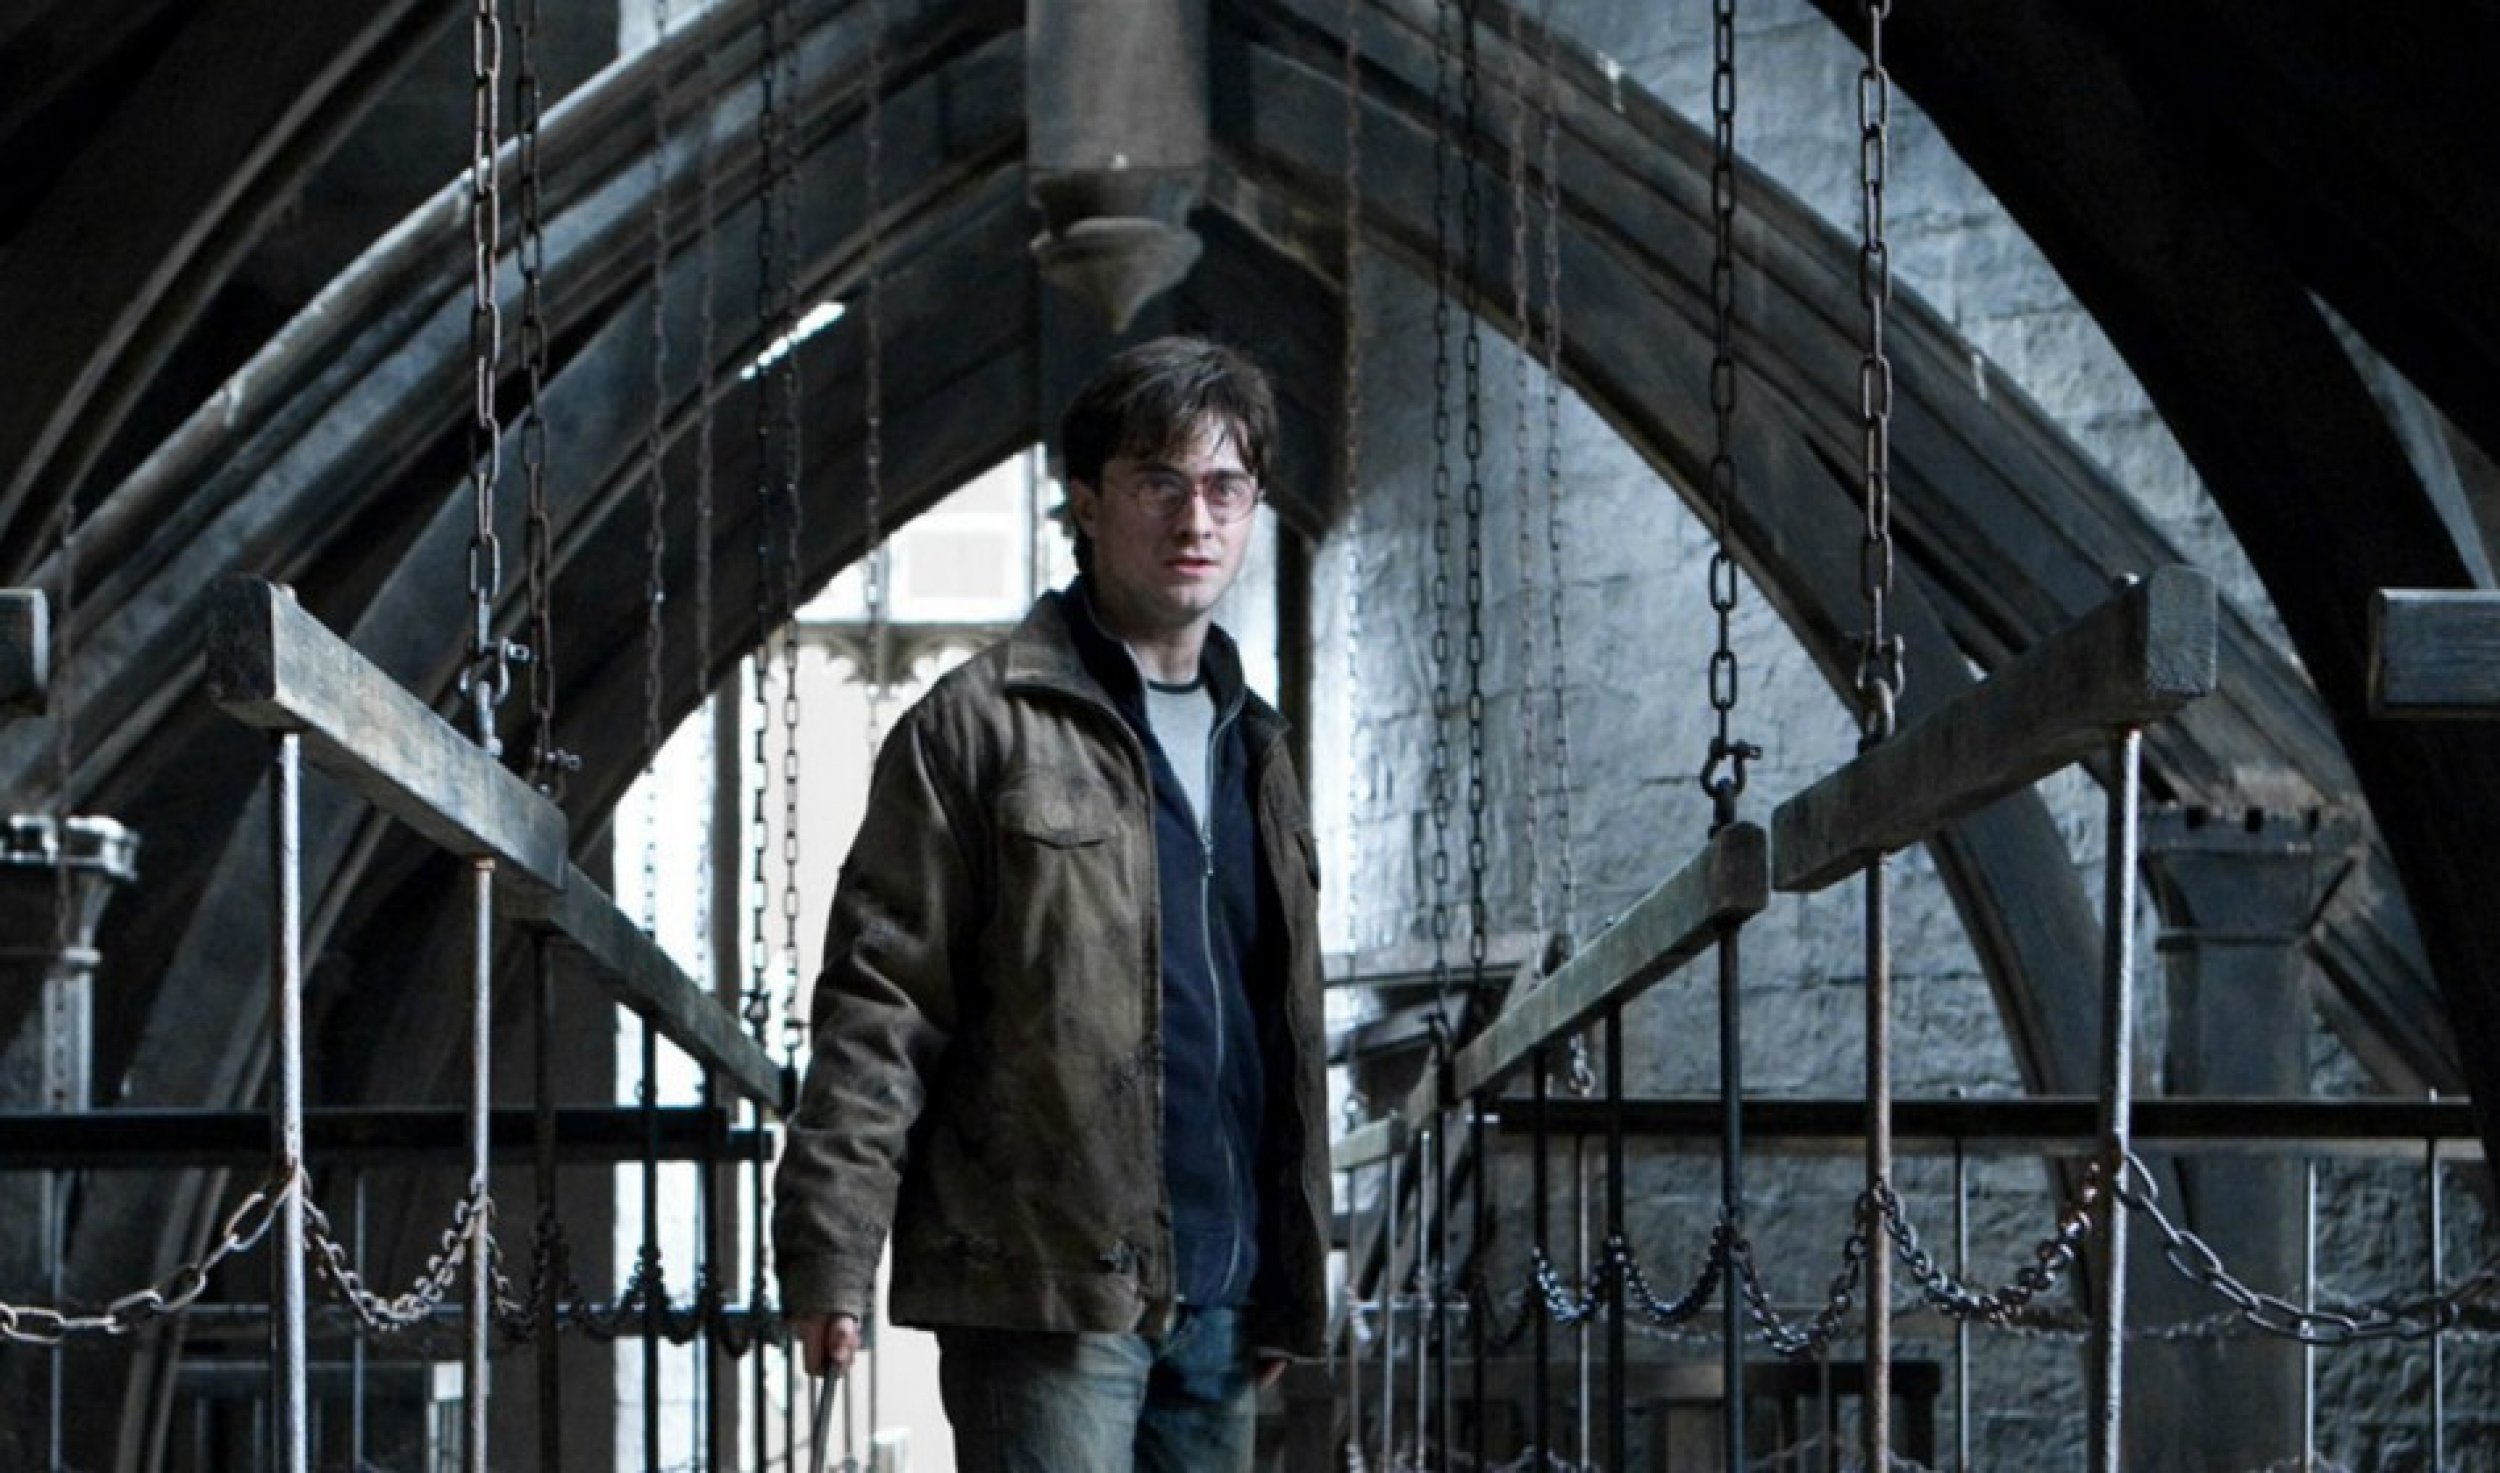 Harry Potter and the Deathly Hallows Part 2 